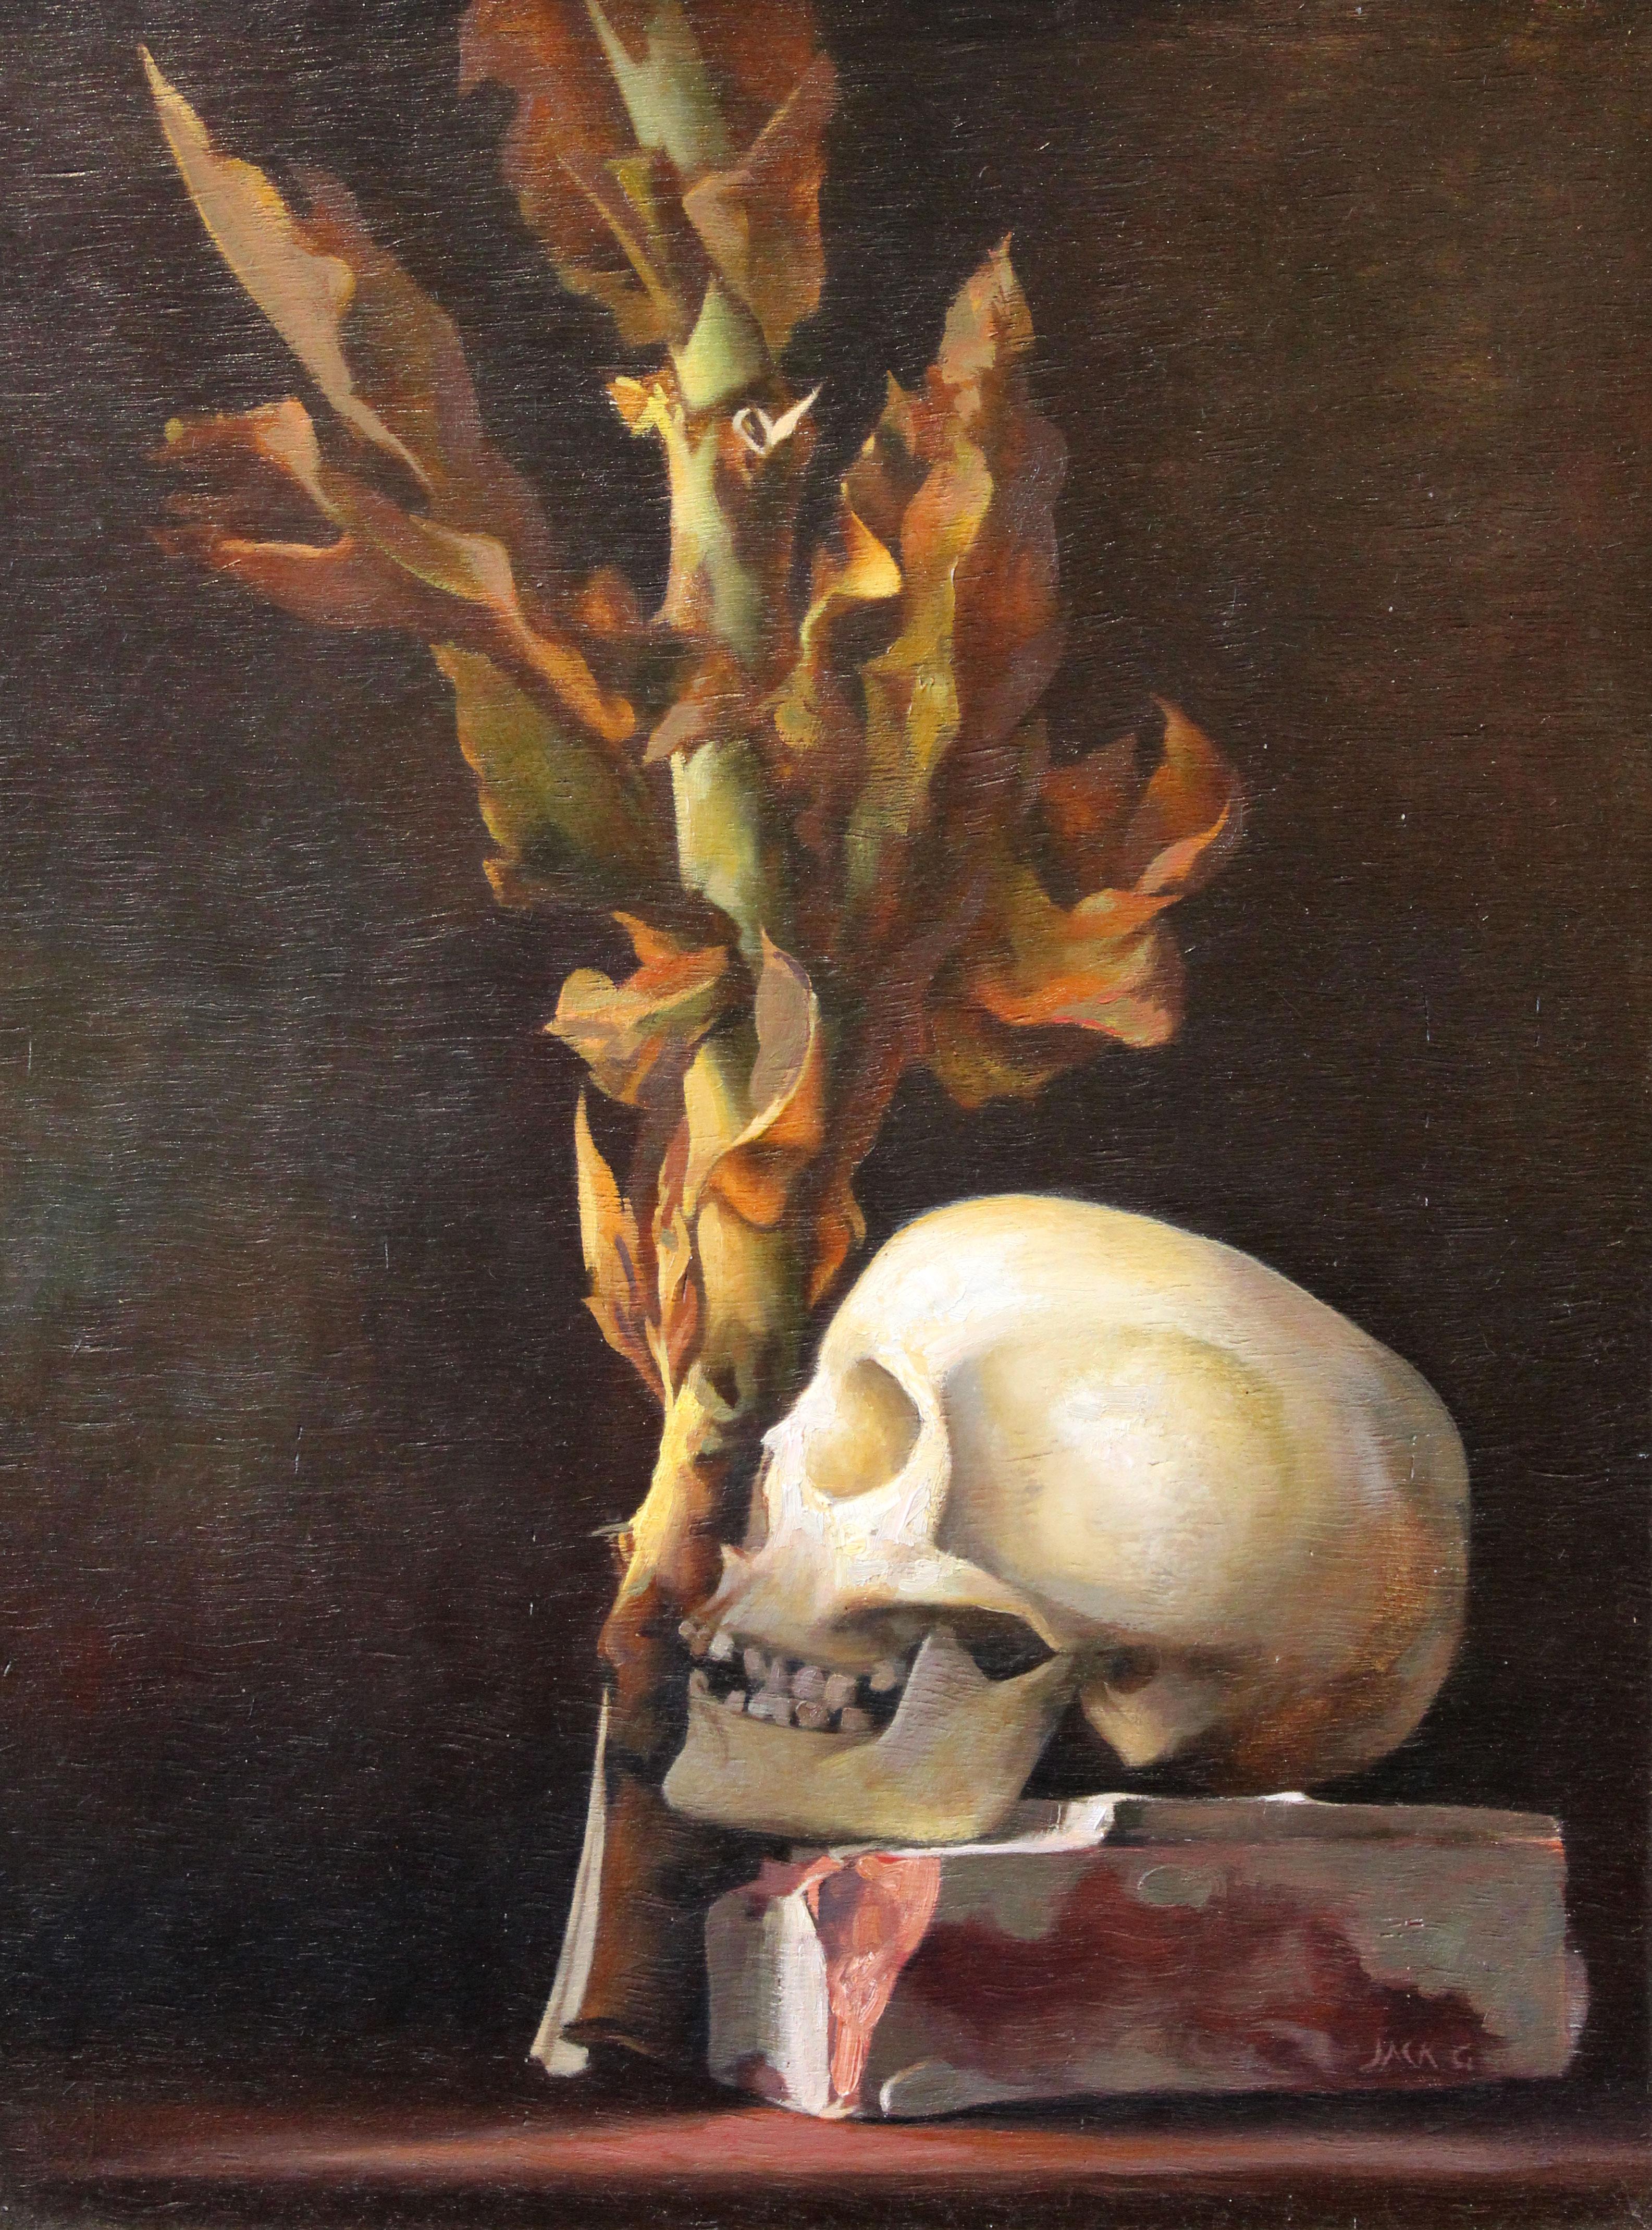 Absolutely superb realism. It has the quality of a Renaissance memento mori painting, and shows the painstaking old-school technique as well. But my favorite part of this painting is the quirky appearance of the red brick upon which the skull sits.